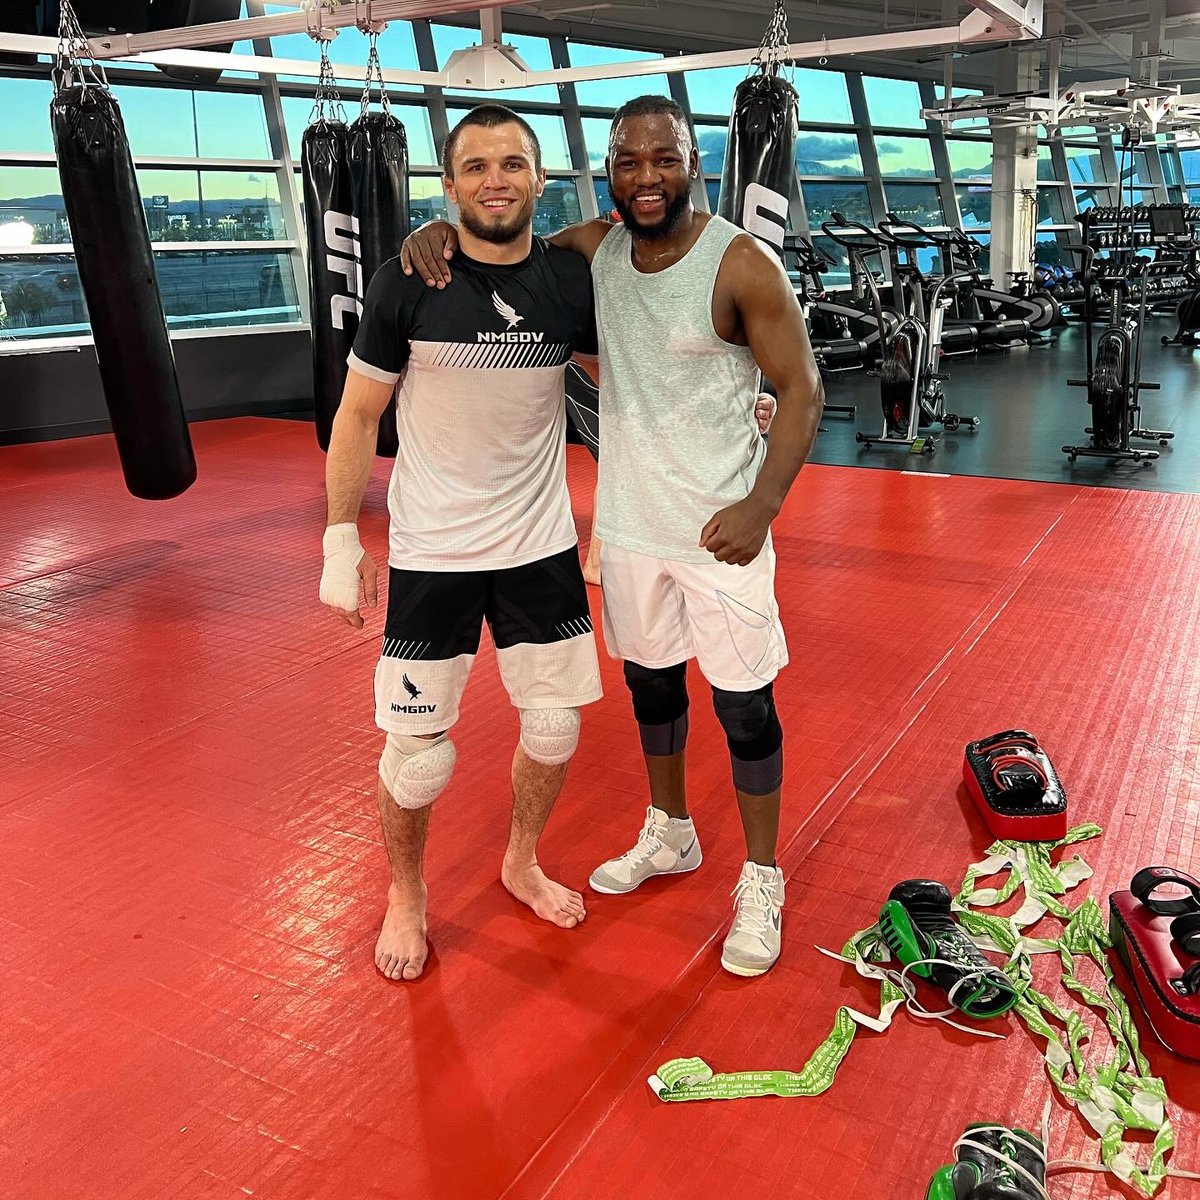 Great Sparring session with my younger brother @umar_nurmagomedov 🥷🏼. Same goal.